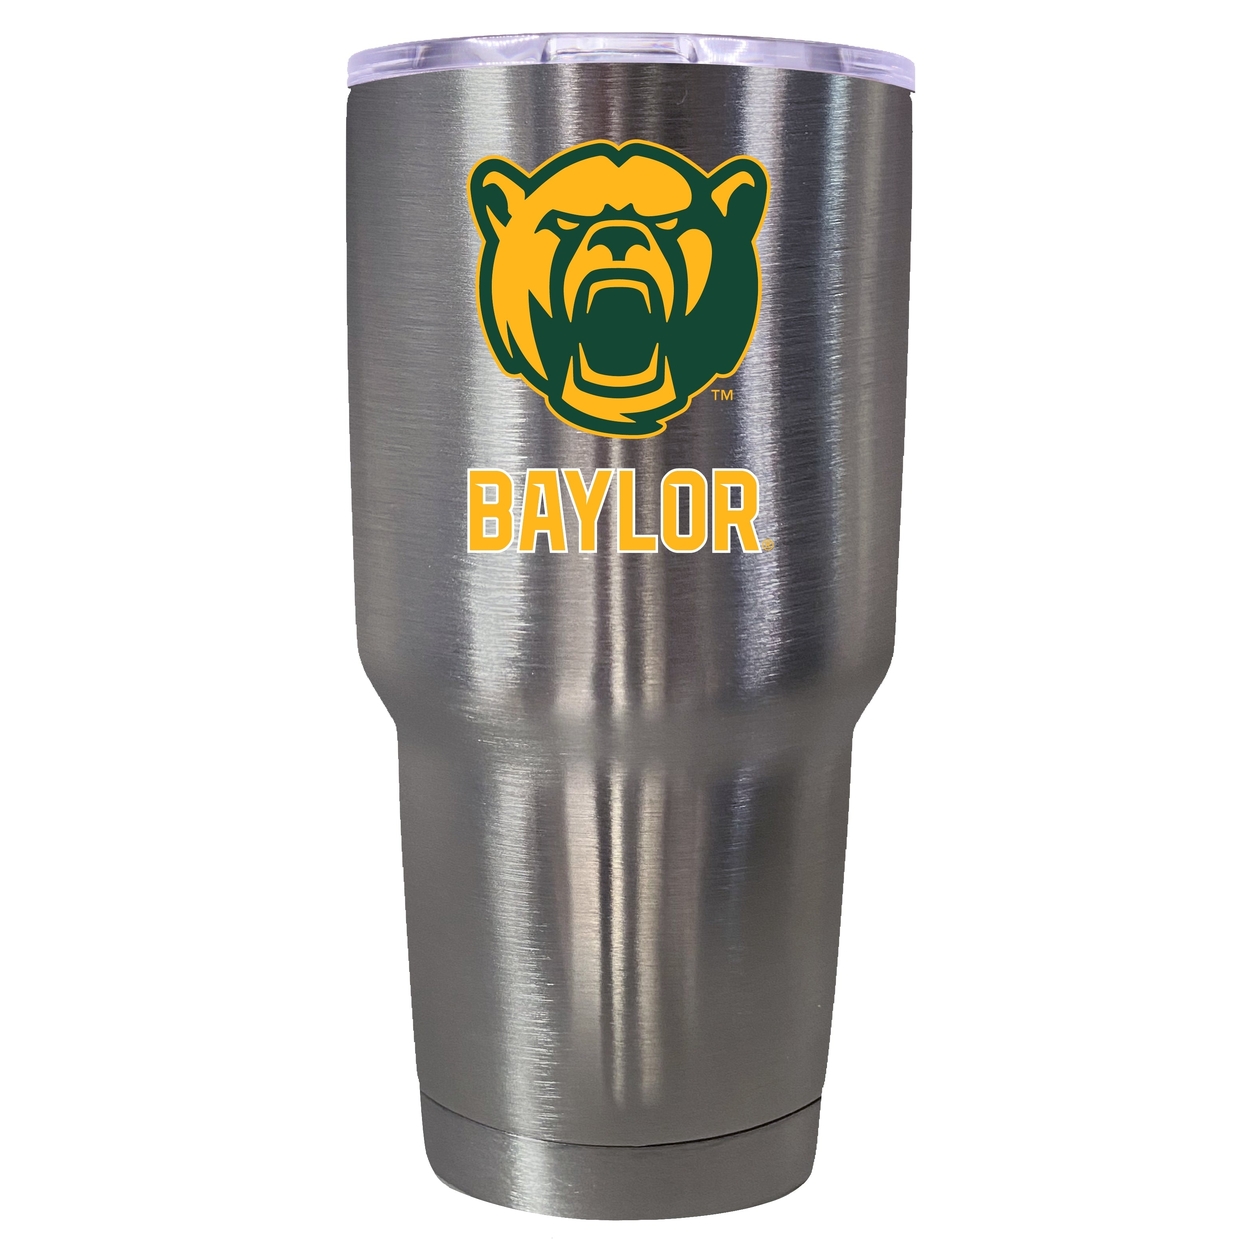 Baylor Bears 24 Oz Insulated Stainless Steel Tumbler